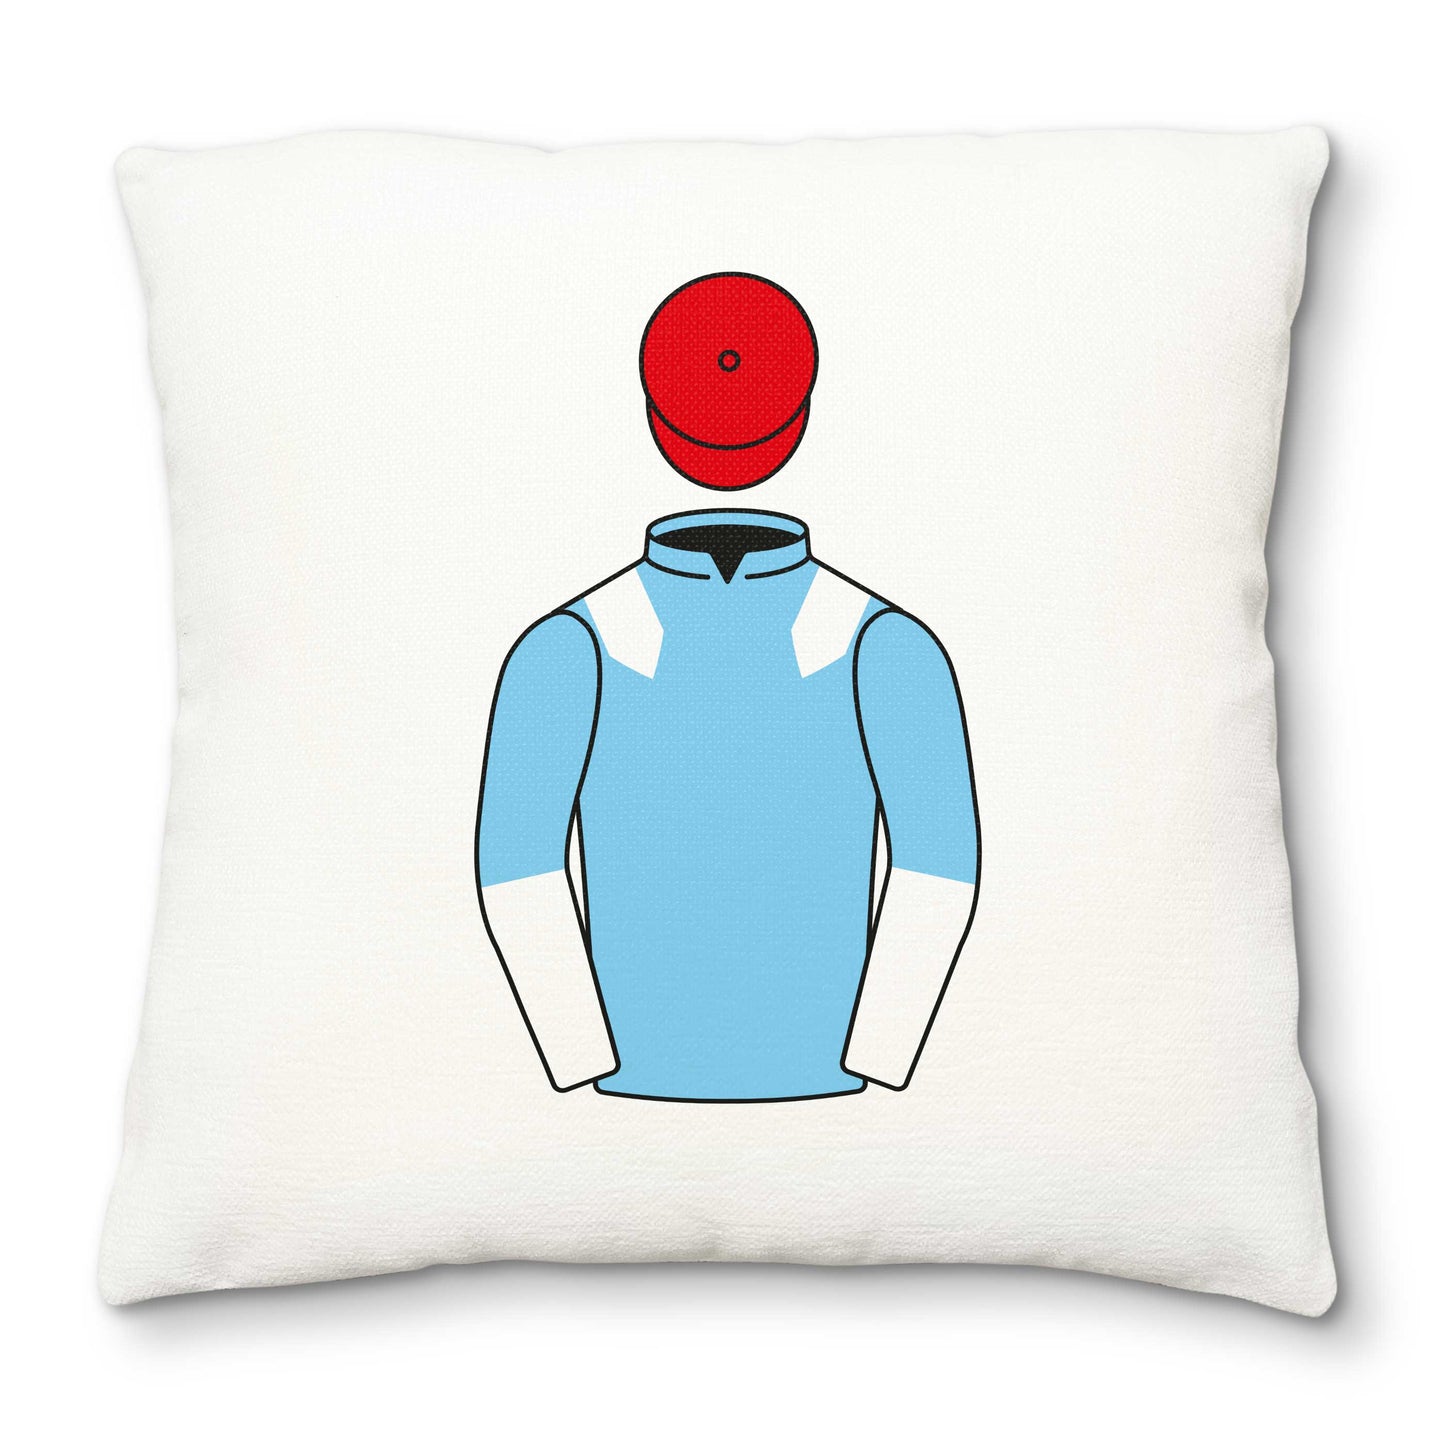 Foxtrot Racing Deluxe Cushion Cover - Hacked Up